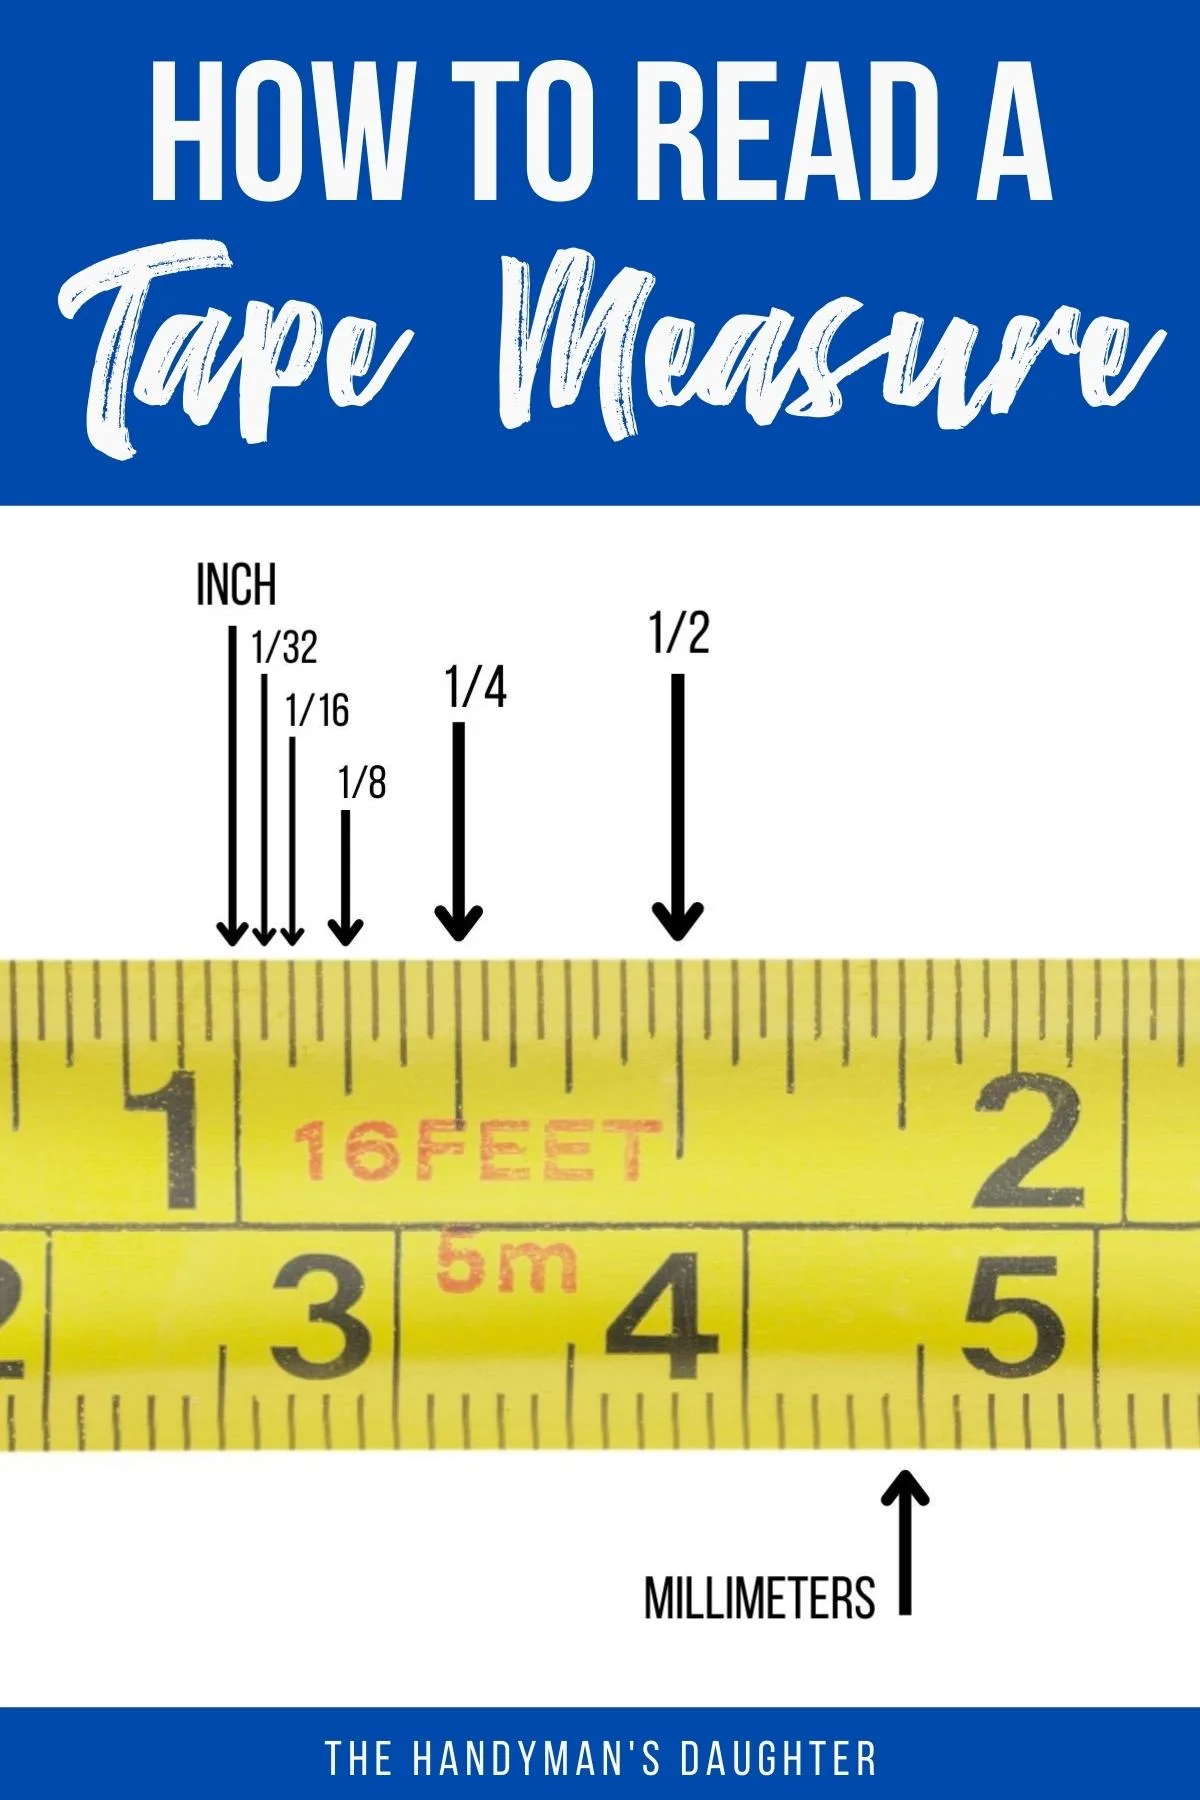 https://www.thehandymansdaughter.com/wp-content/uploads/2022/10/How-to-Read-a-tape-measure-Pin-1-1.jpeg.webp